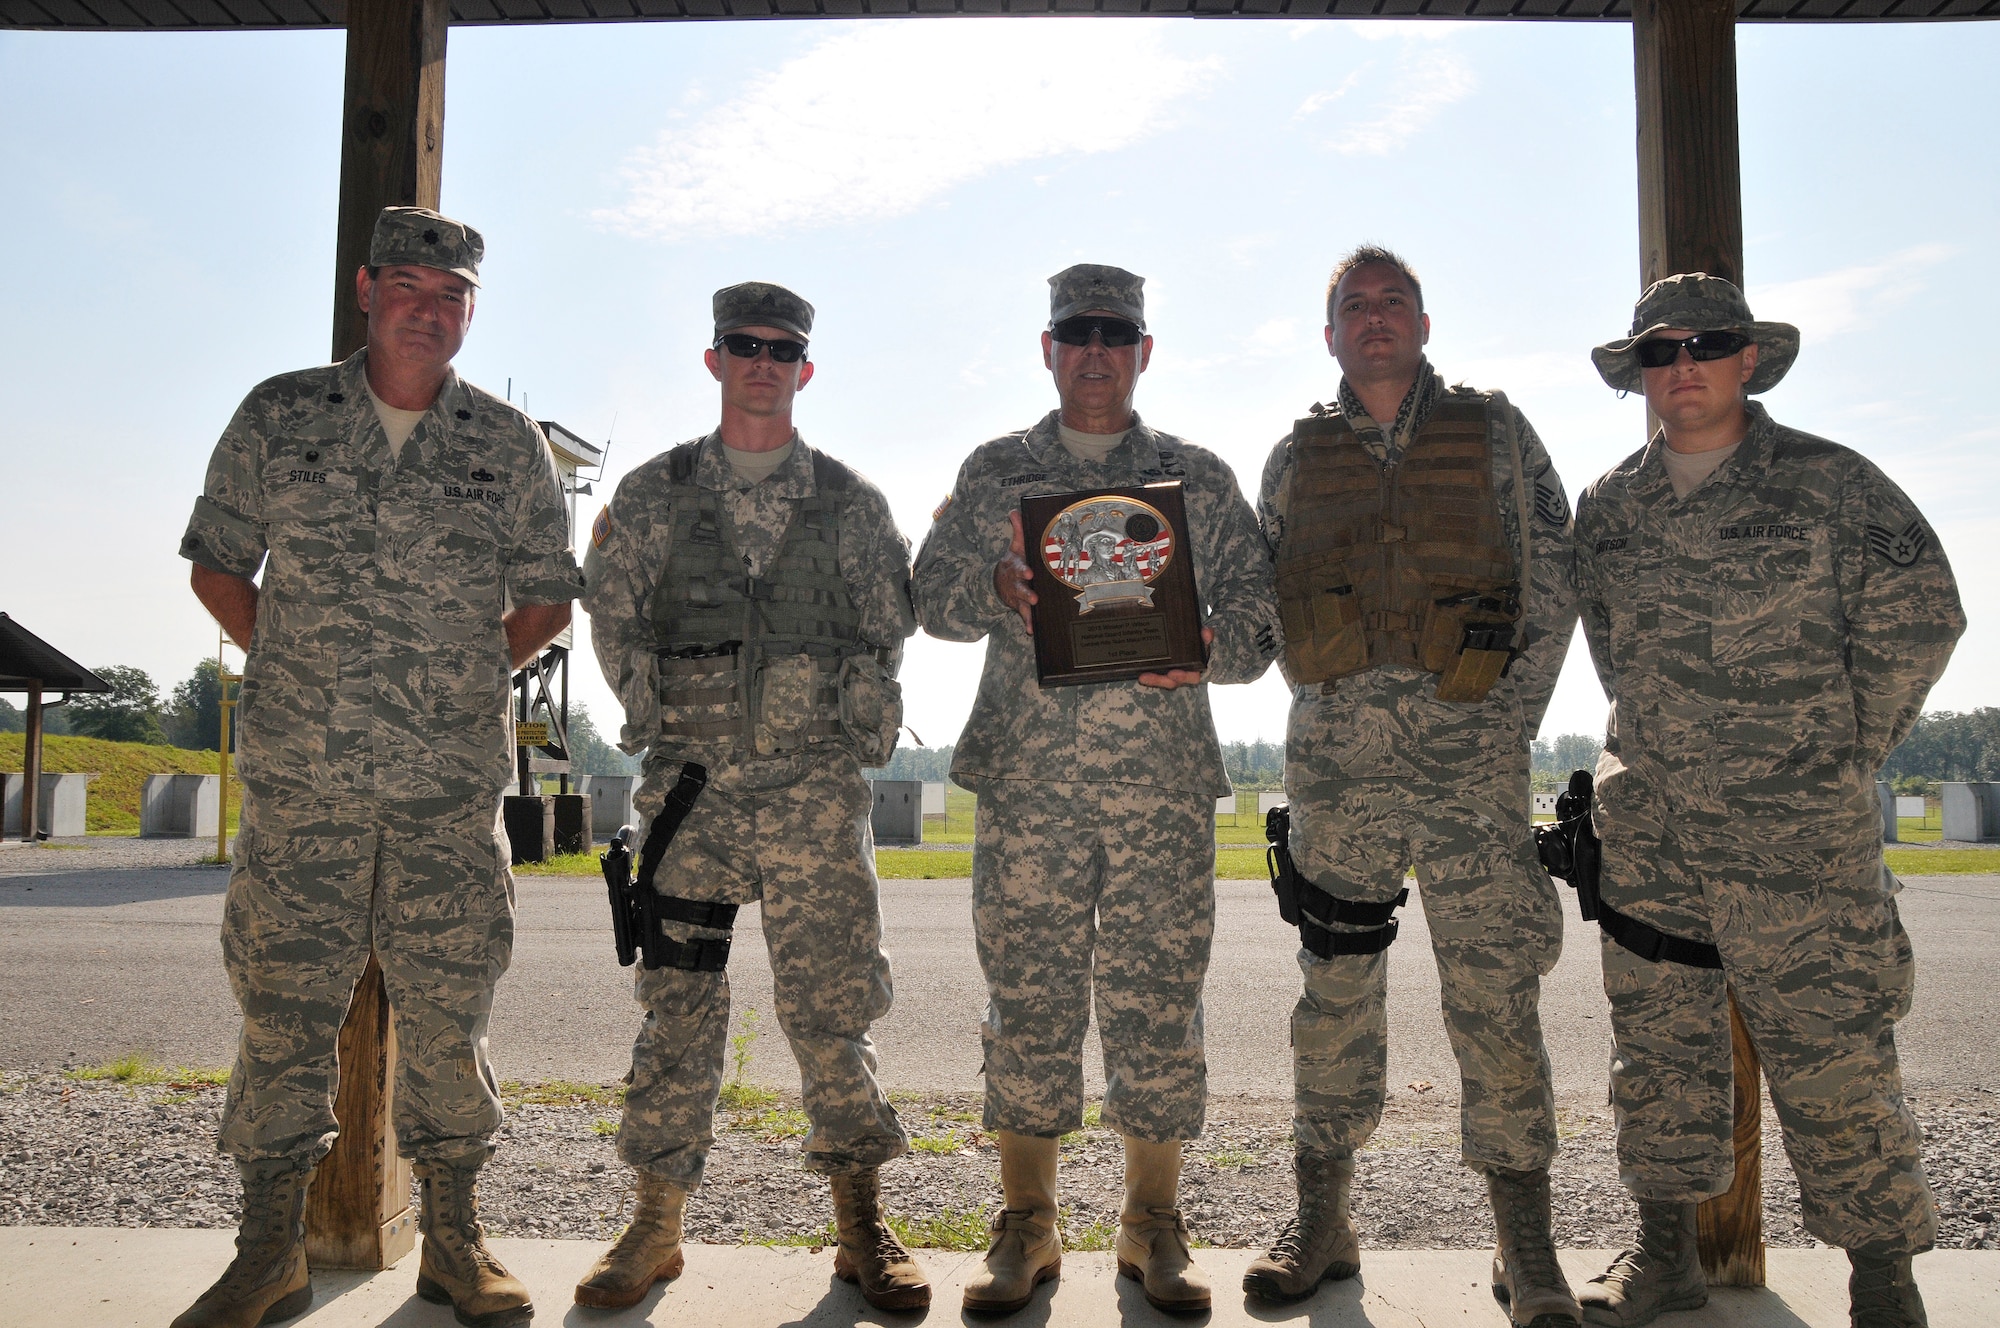 Members of the winning 2013 Combat Rifle Team present the 1st Place plaque to Brig. Gen. Terry Ethridge, Director of Staff, Tennessee National Guard during the 2014 Tennessee Adjutant General Marksmanship Pistol Match in Tullahoma, TN on Aug 16 to show thier appreciation for his support of the program. The Tennesee TAG Match is held anually to promote marksmanship skills in the Army and Air National Guard. From left to right, Lt. Col. Keith Stiles, Sgt. Casey Clark, Brig. Gen. Terry Ethridge, Master Sgt. Mike Brumer, and Staff Sgt. Ethan Deutsch.  (U.S. Air National Guard photo by Master Sgt. Kendra M. Owenby, 134 ARW Public Affairs)